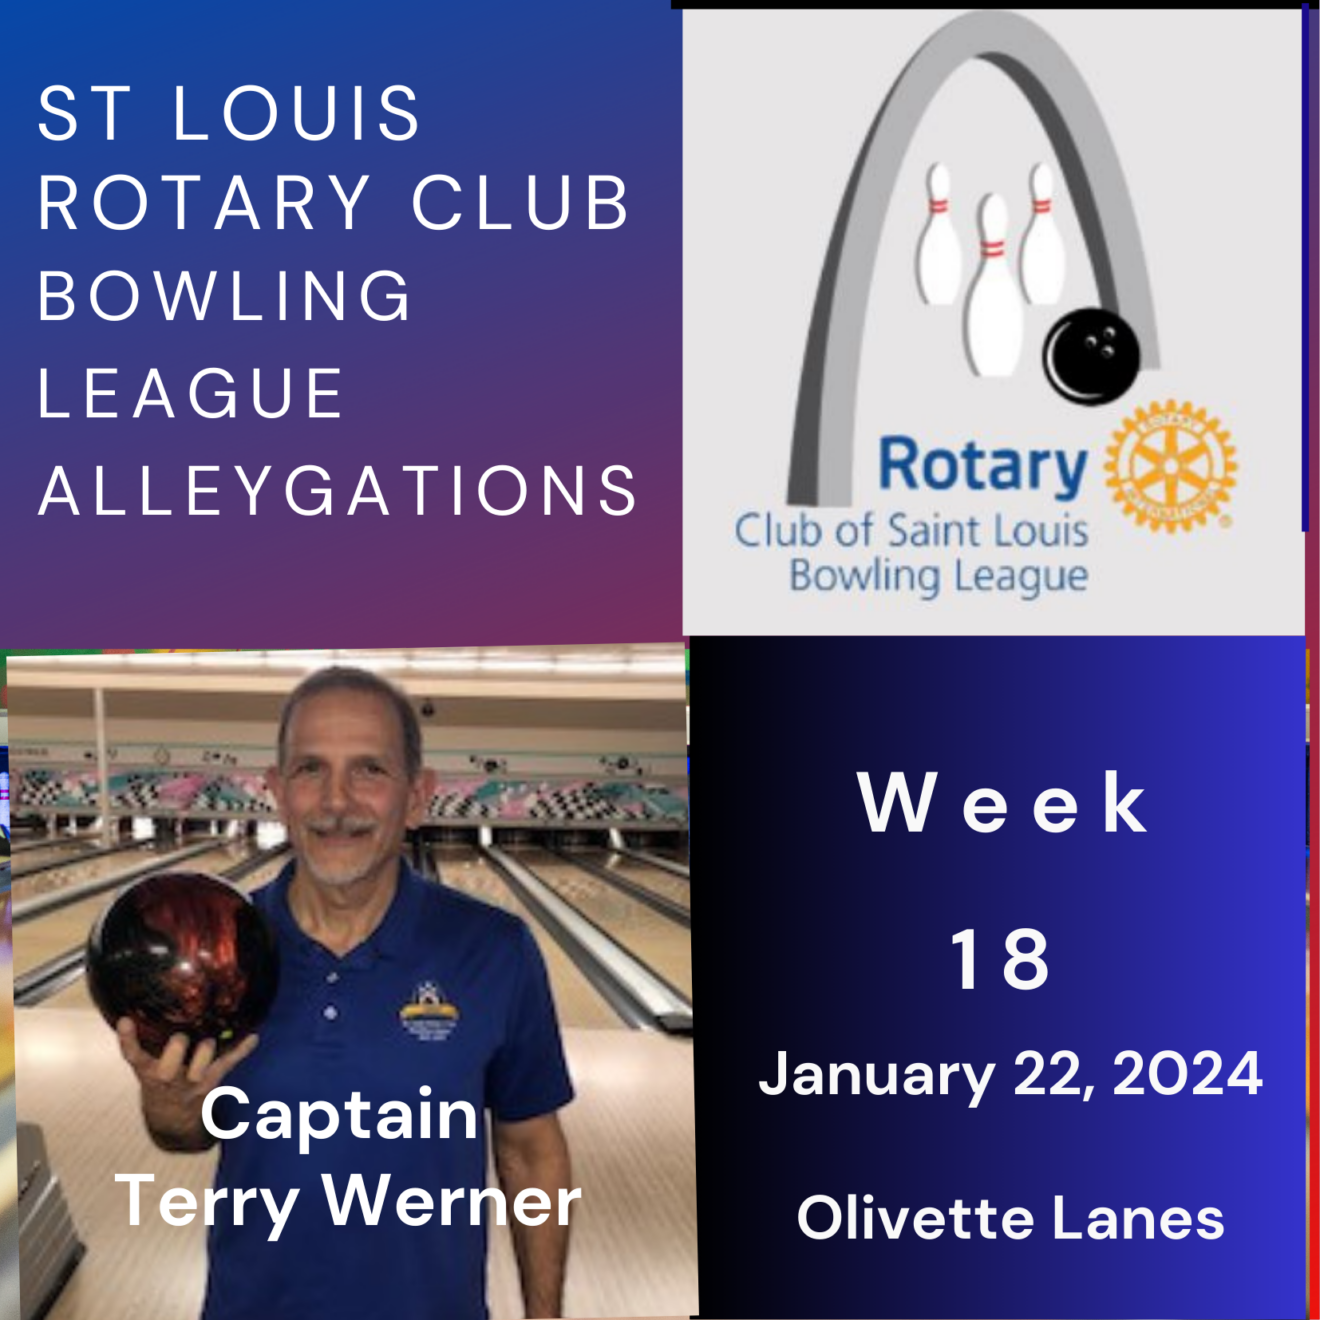 Terry Werner Bowling Alleygations 1-25-24